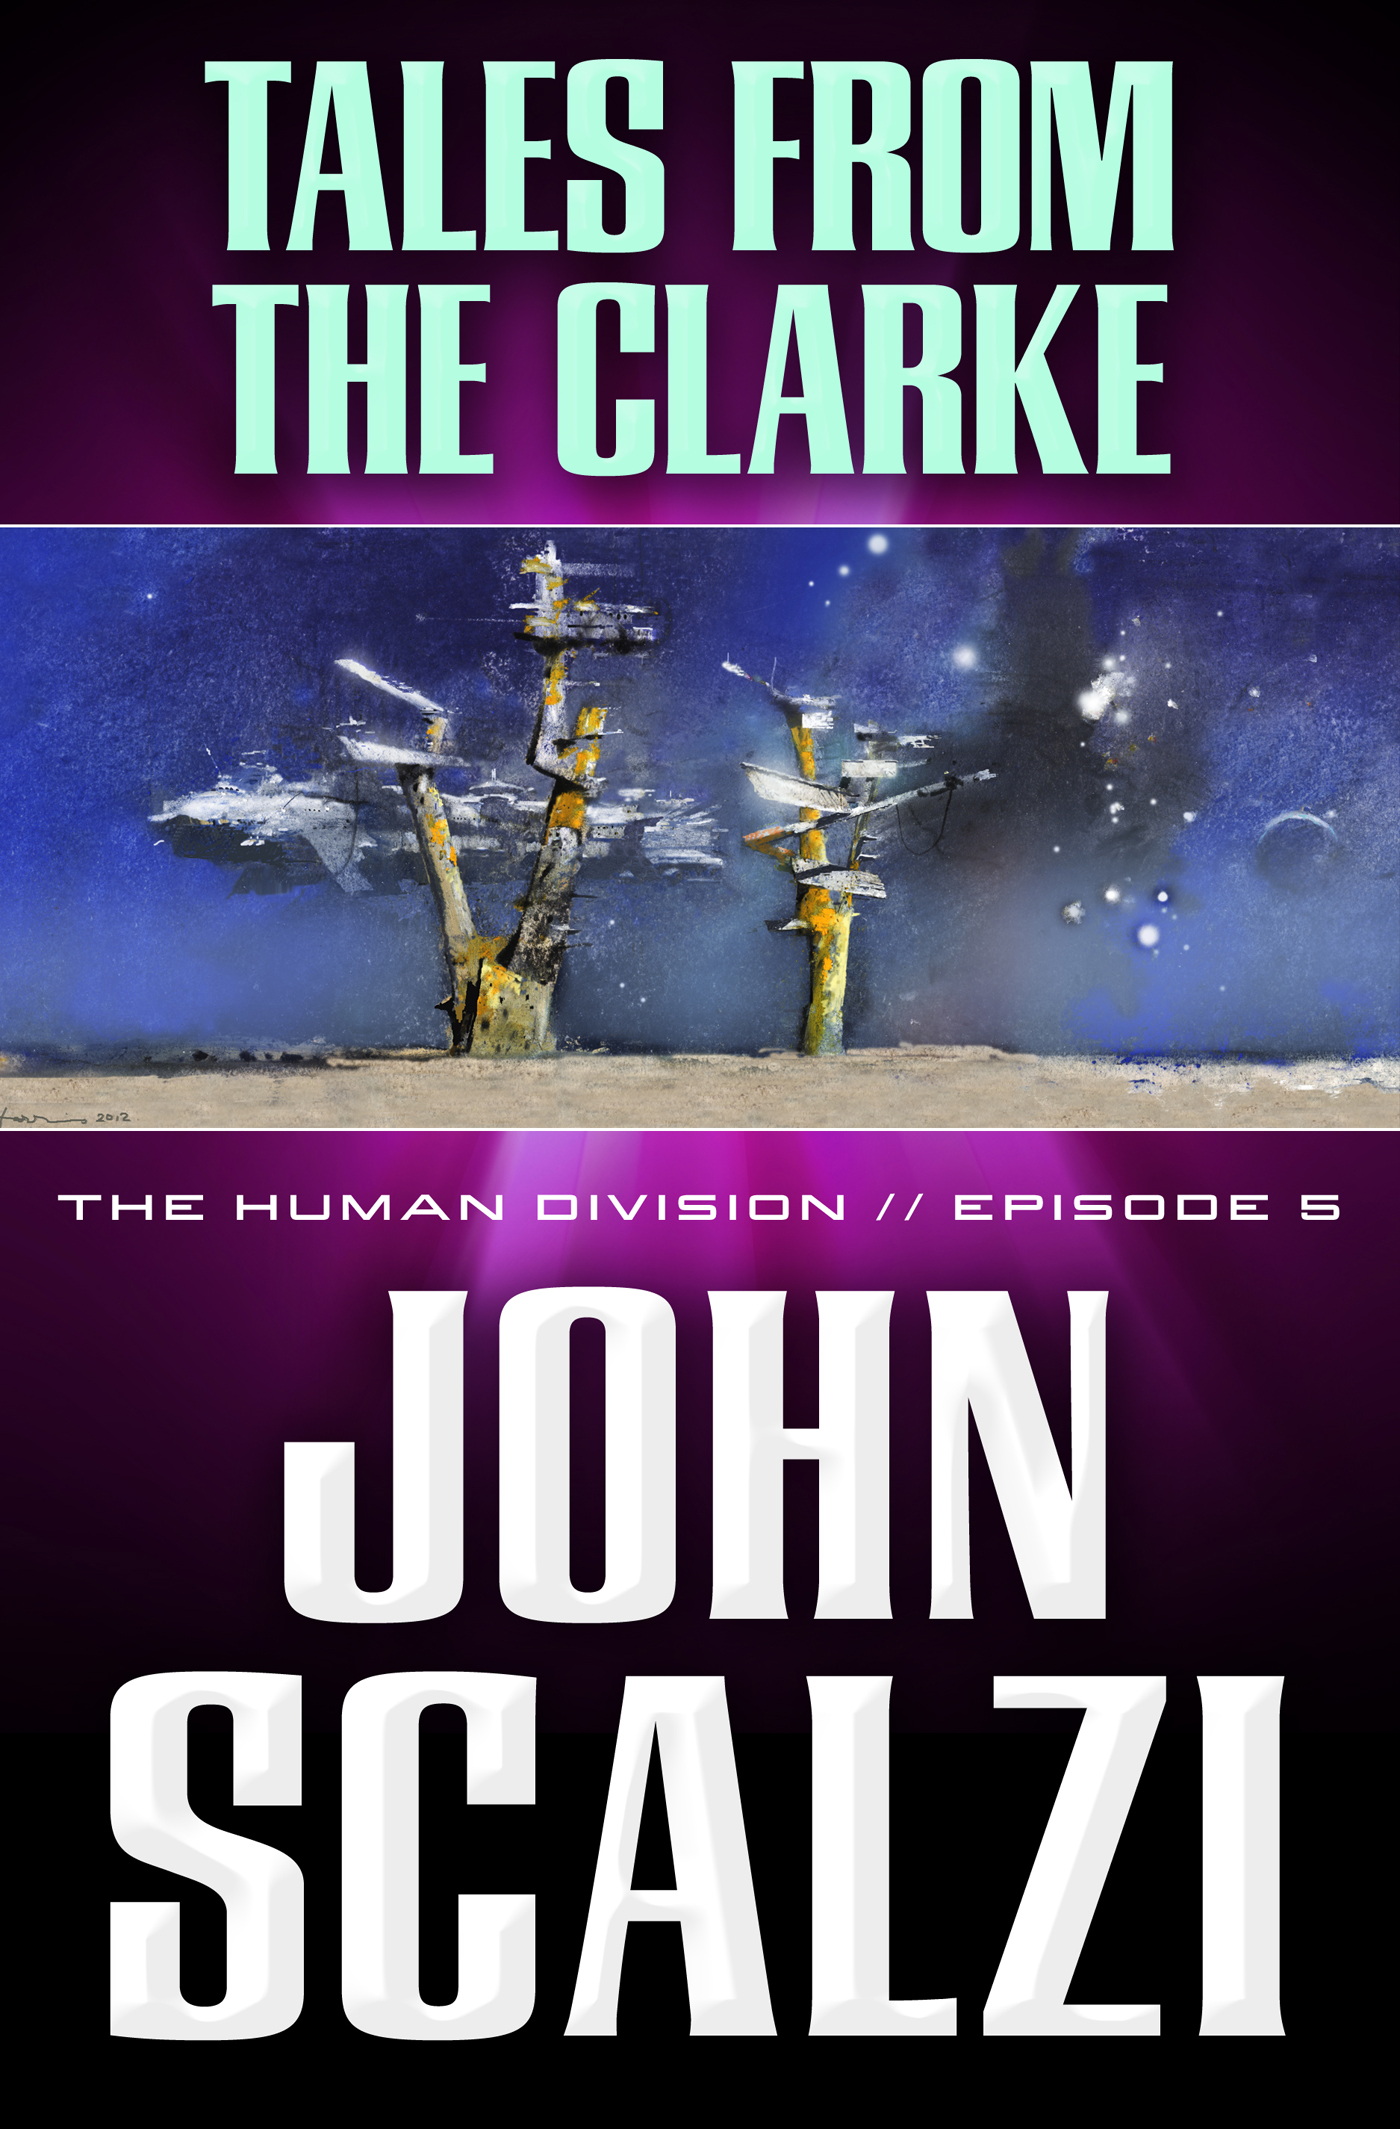 The Human Division #5: Tales From the Clarke by John Scalzi